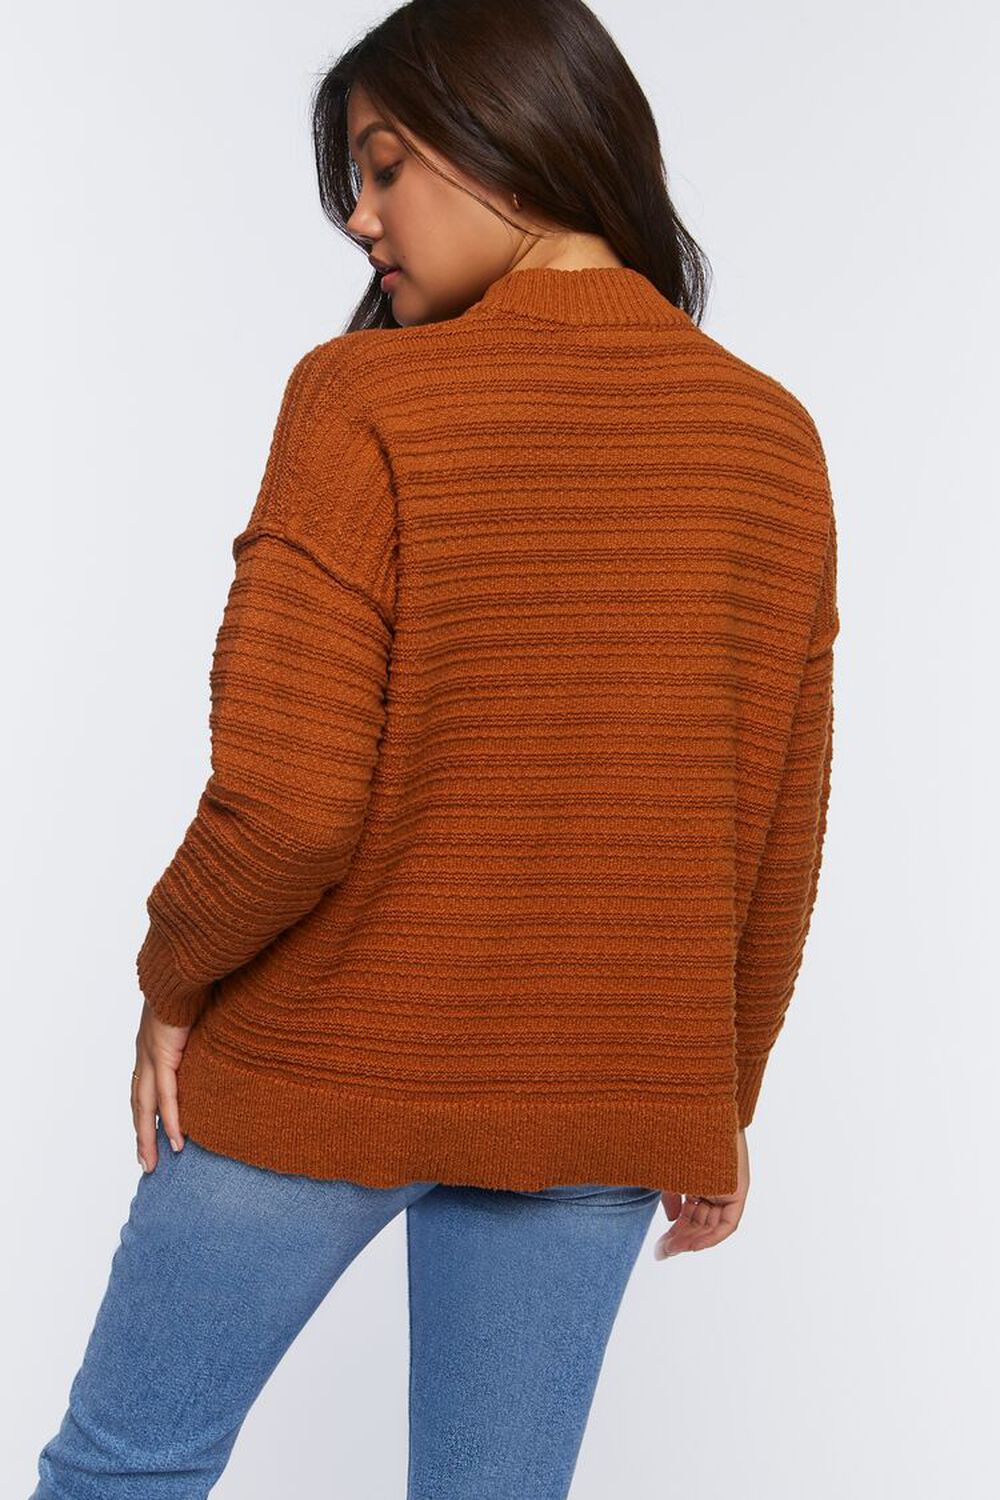 GINGER Ribbed Mock Neck Sweater Top, image 3